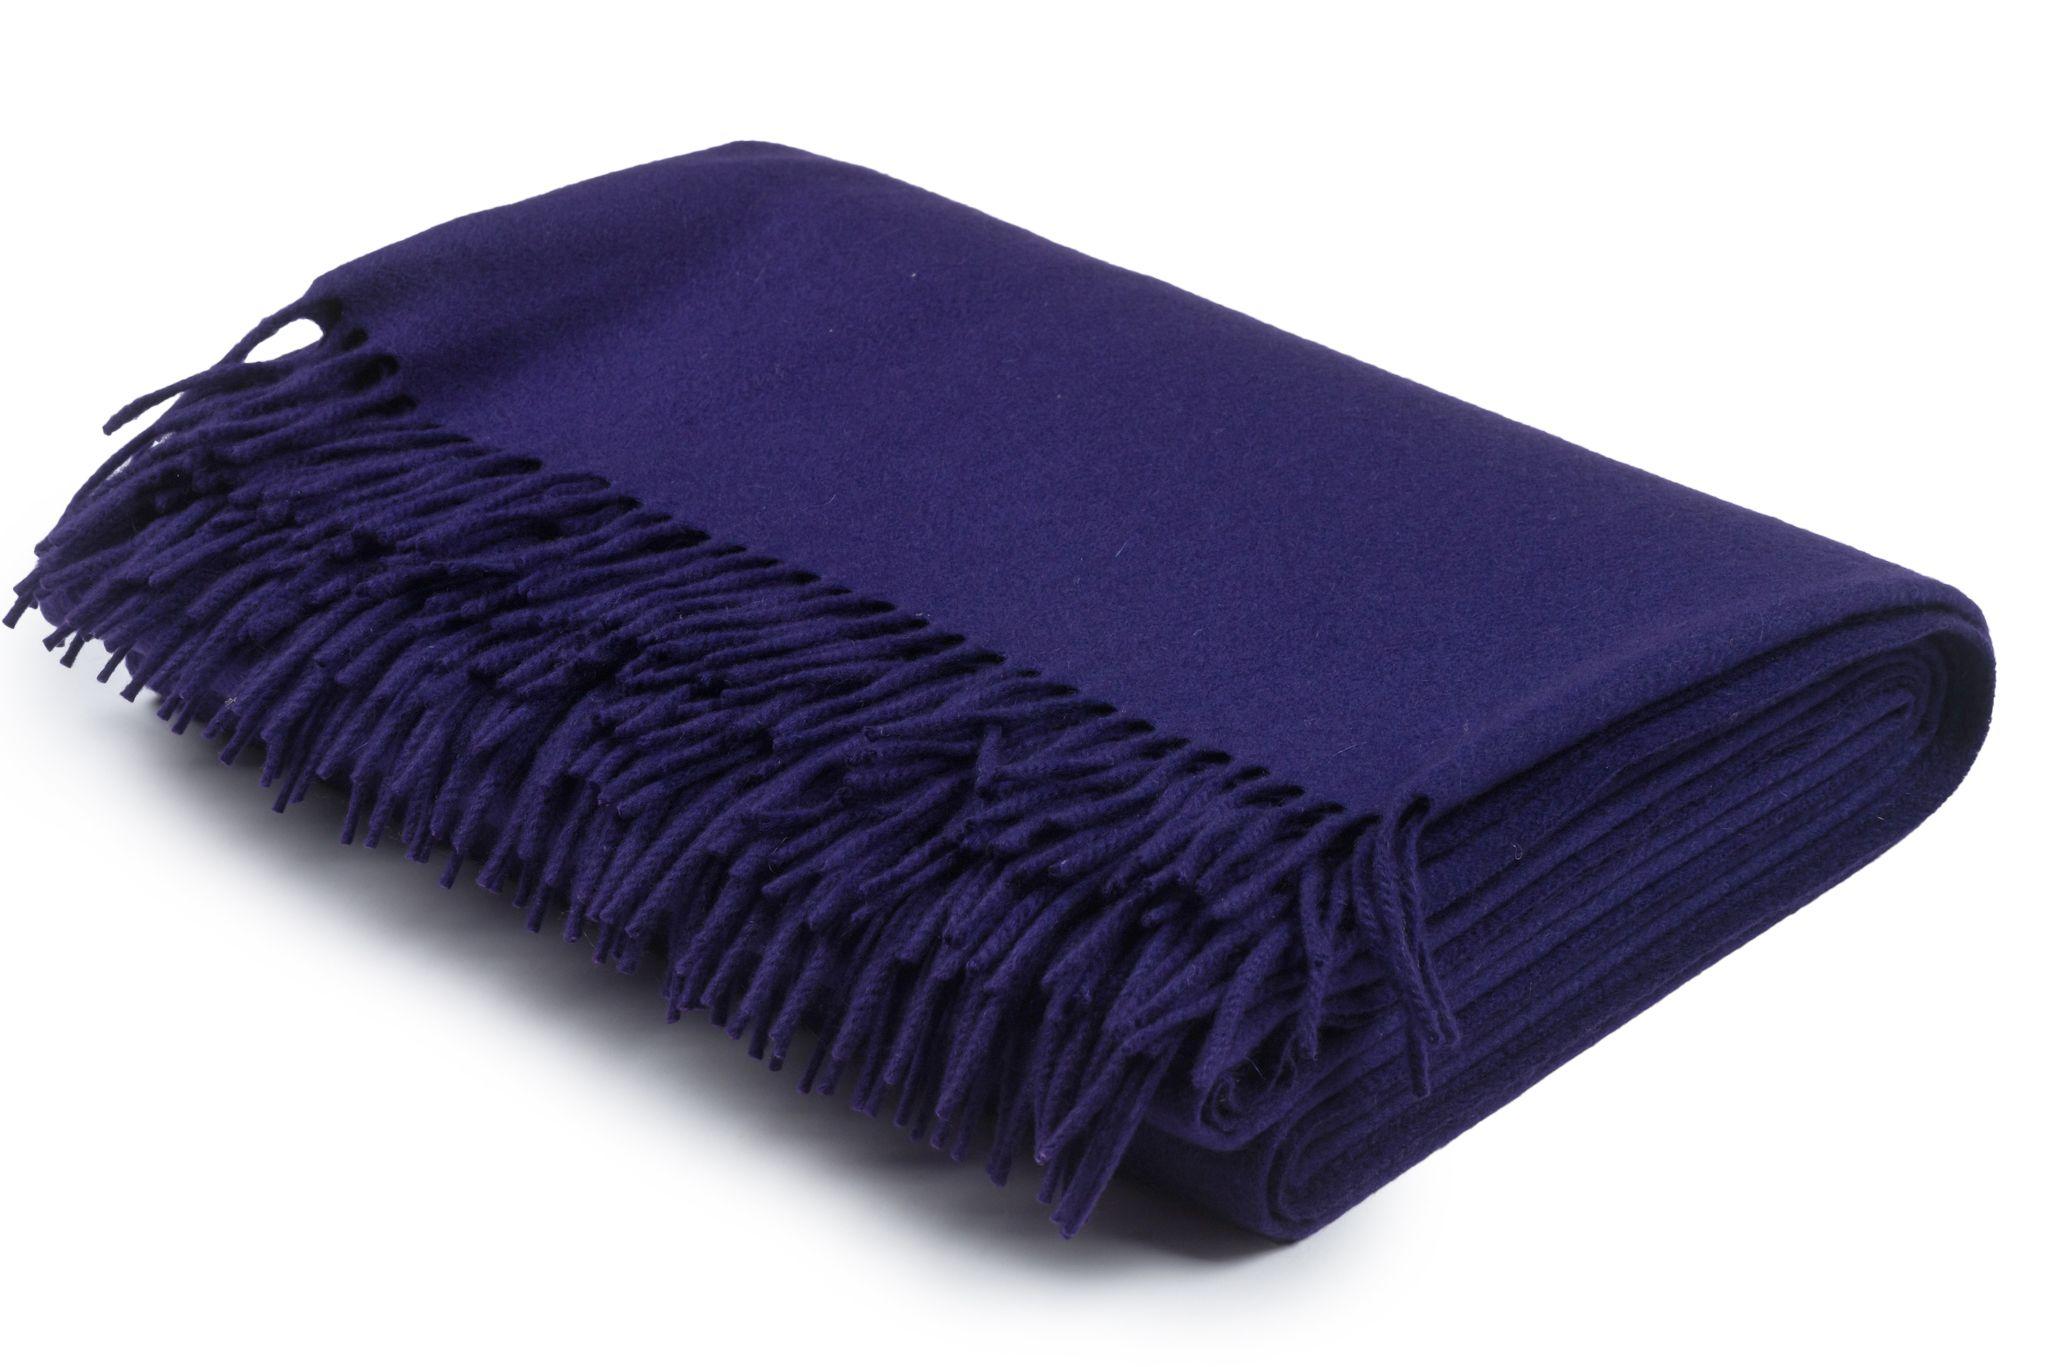 Hermès purple cashmere blanket with fringes and embossed logo. 100% cashmere, finest quality.
Comes without box.